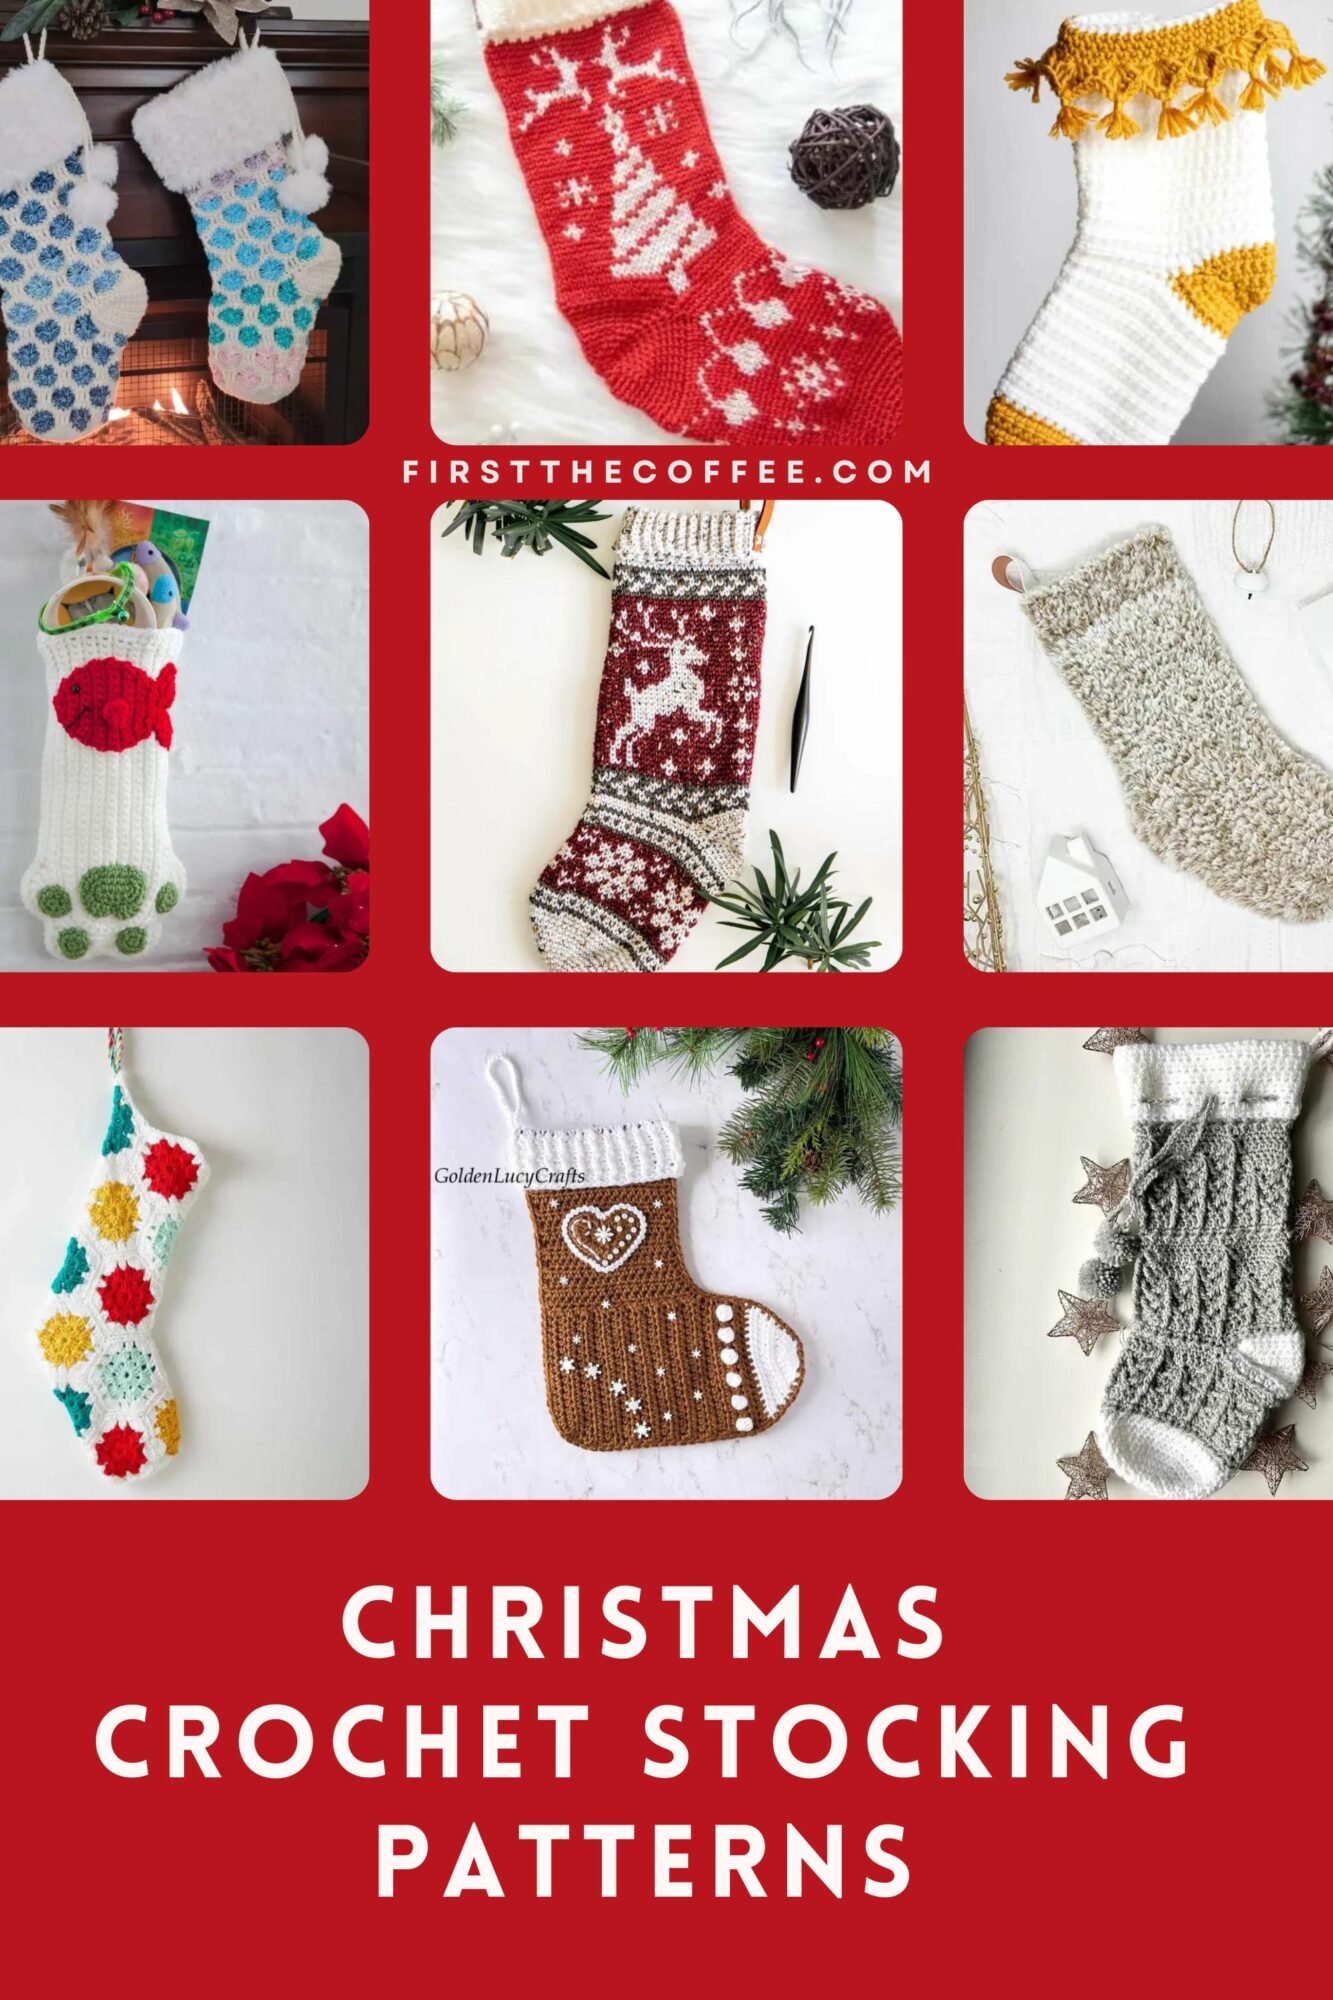 Crochet Christmas Stocking Pattern for the Holidays